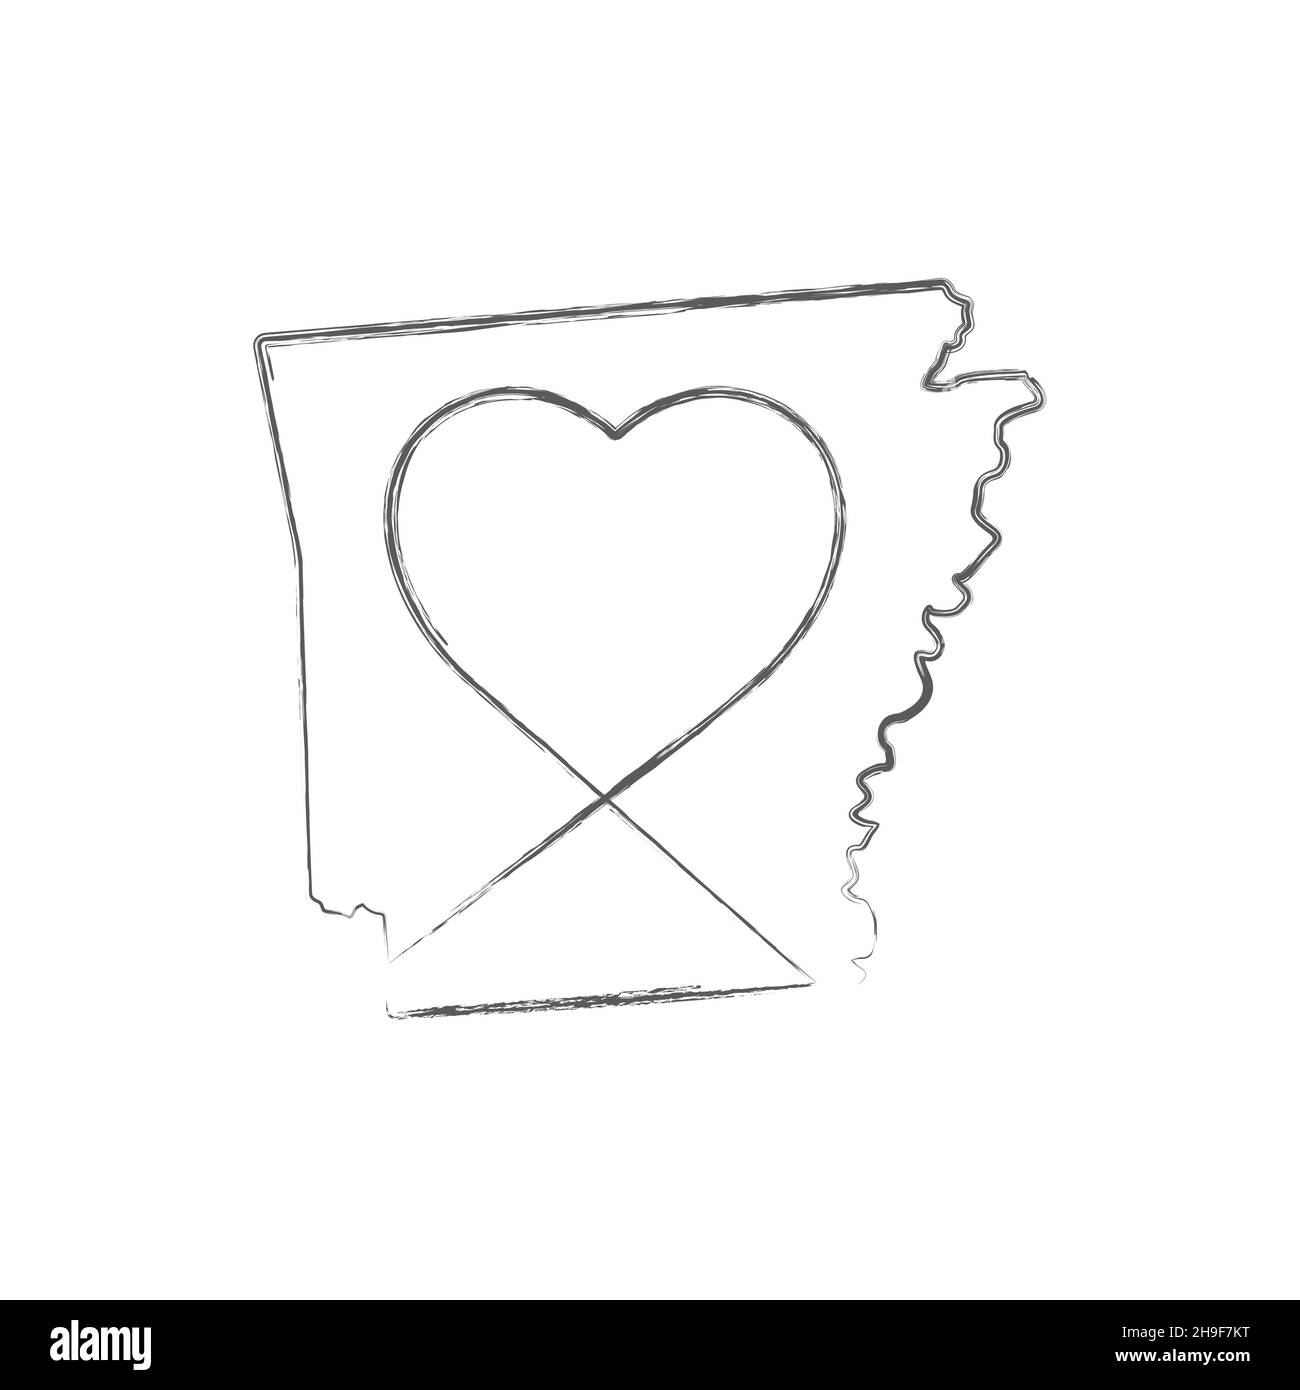 Arkansas US state hand drawn pencil sketch outline map with heart shape. Continuous line drawing of patriotic home sign. A love for a small homeland. Stock Vector